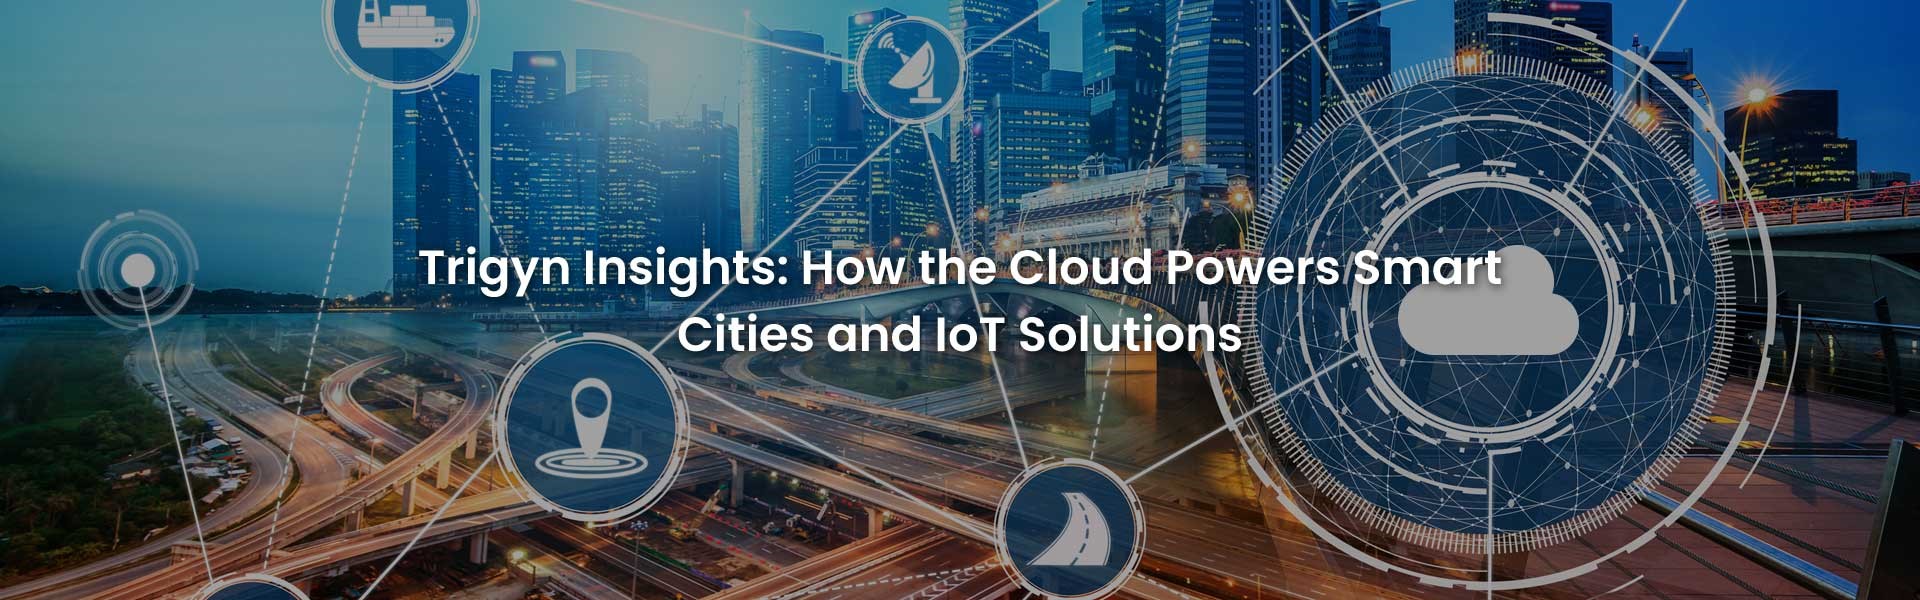 Cloud Powers Smart Cities and IoT Solutions